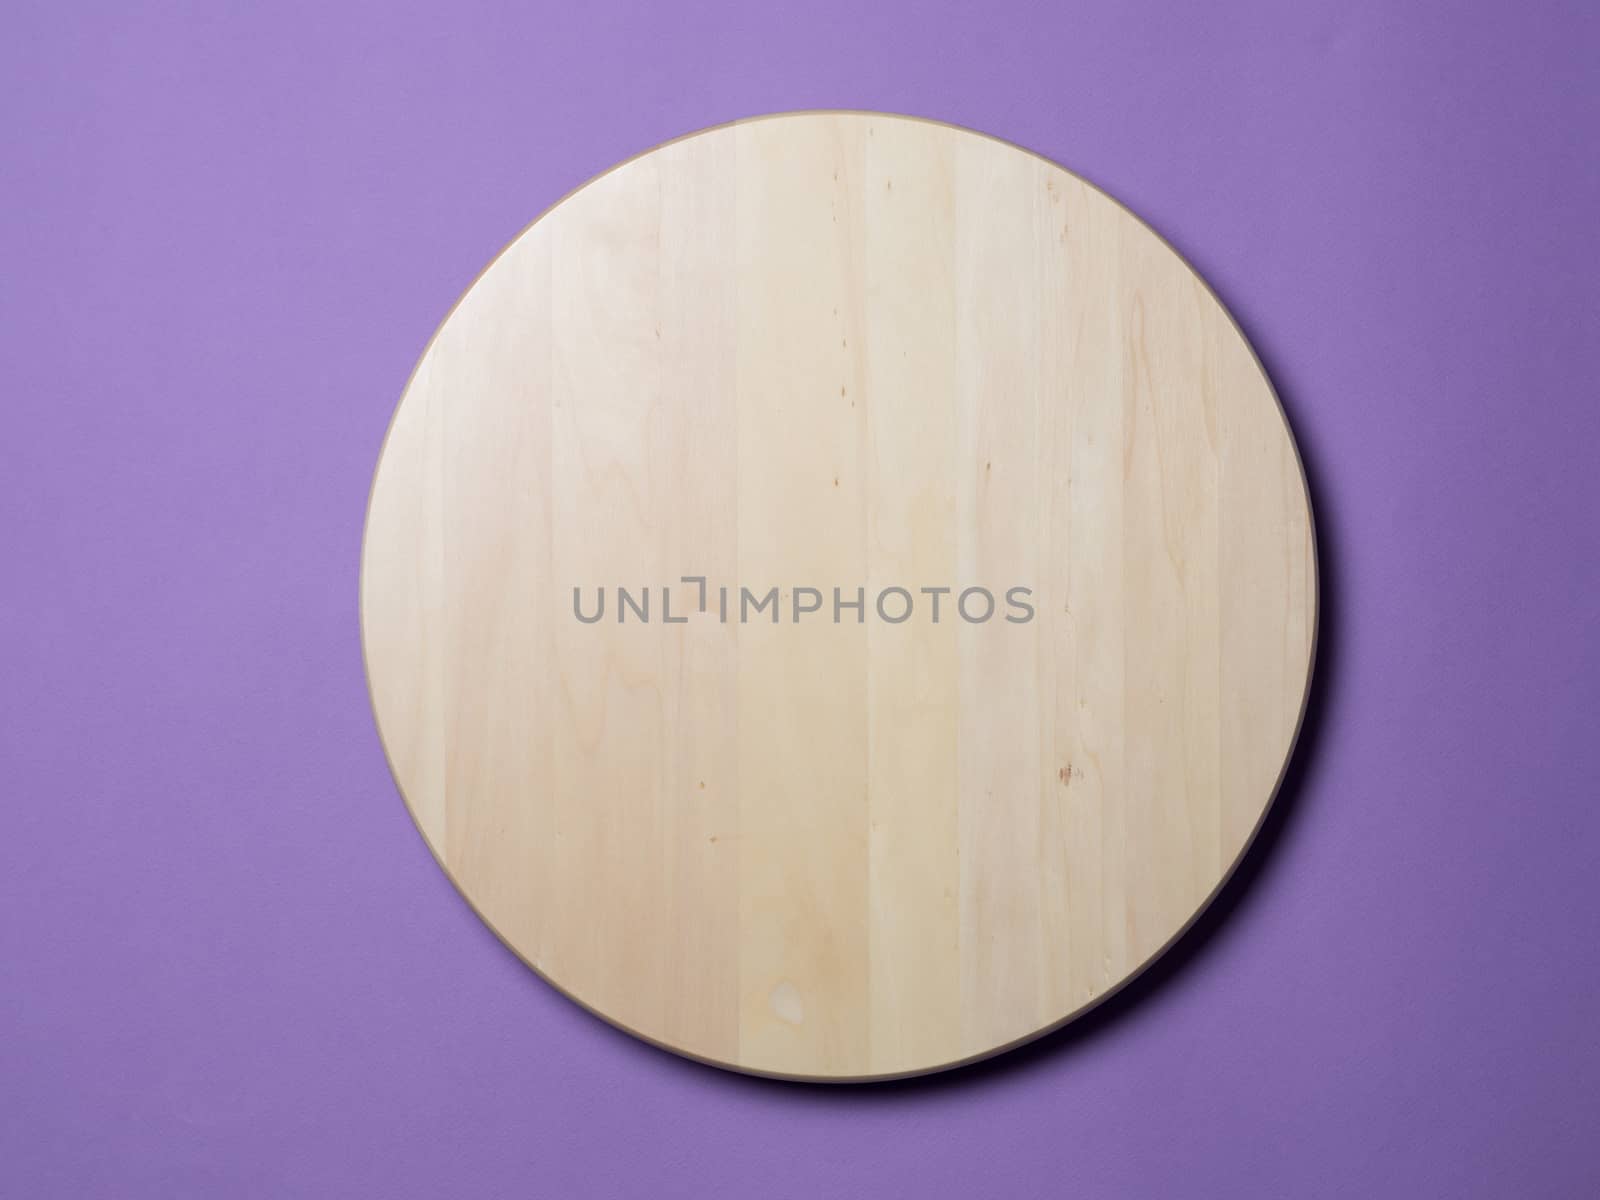 Empty wooden round tray or trencher, cutting board on lilac background. Hard light. Top view or flat lay.